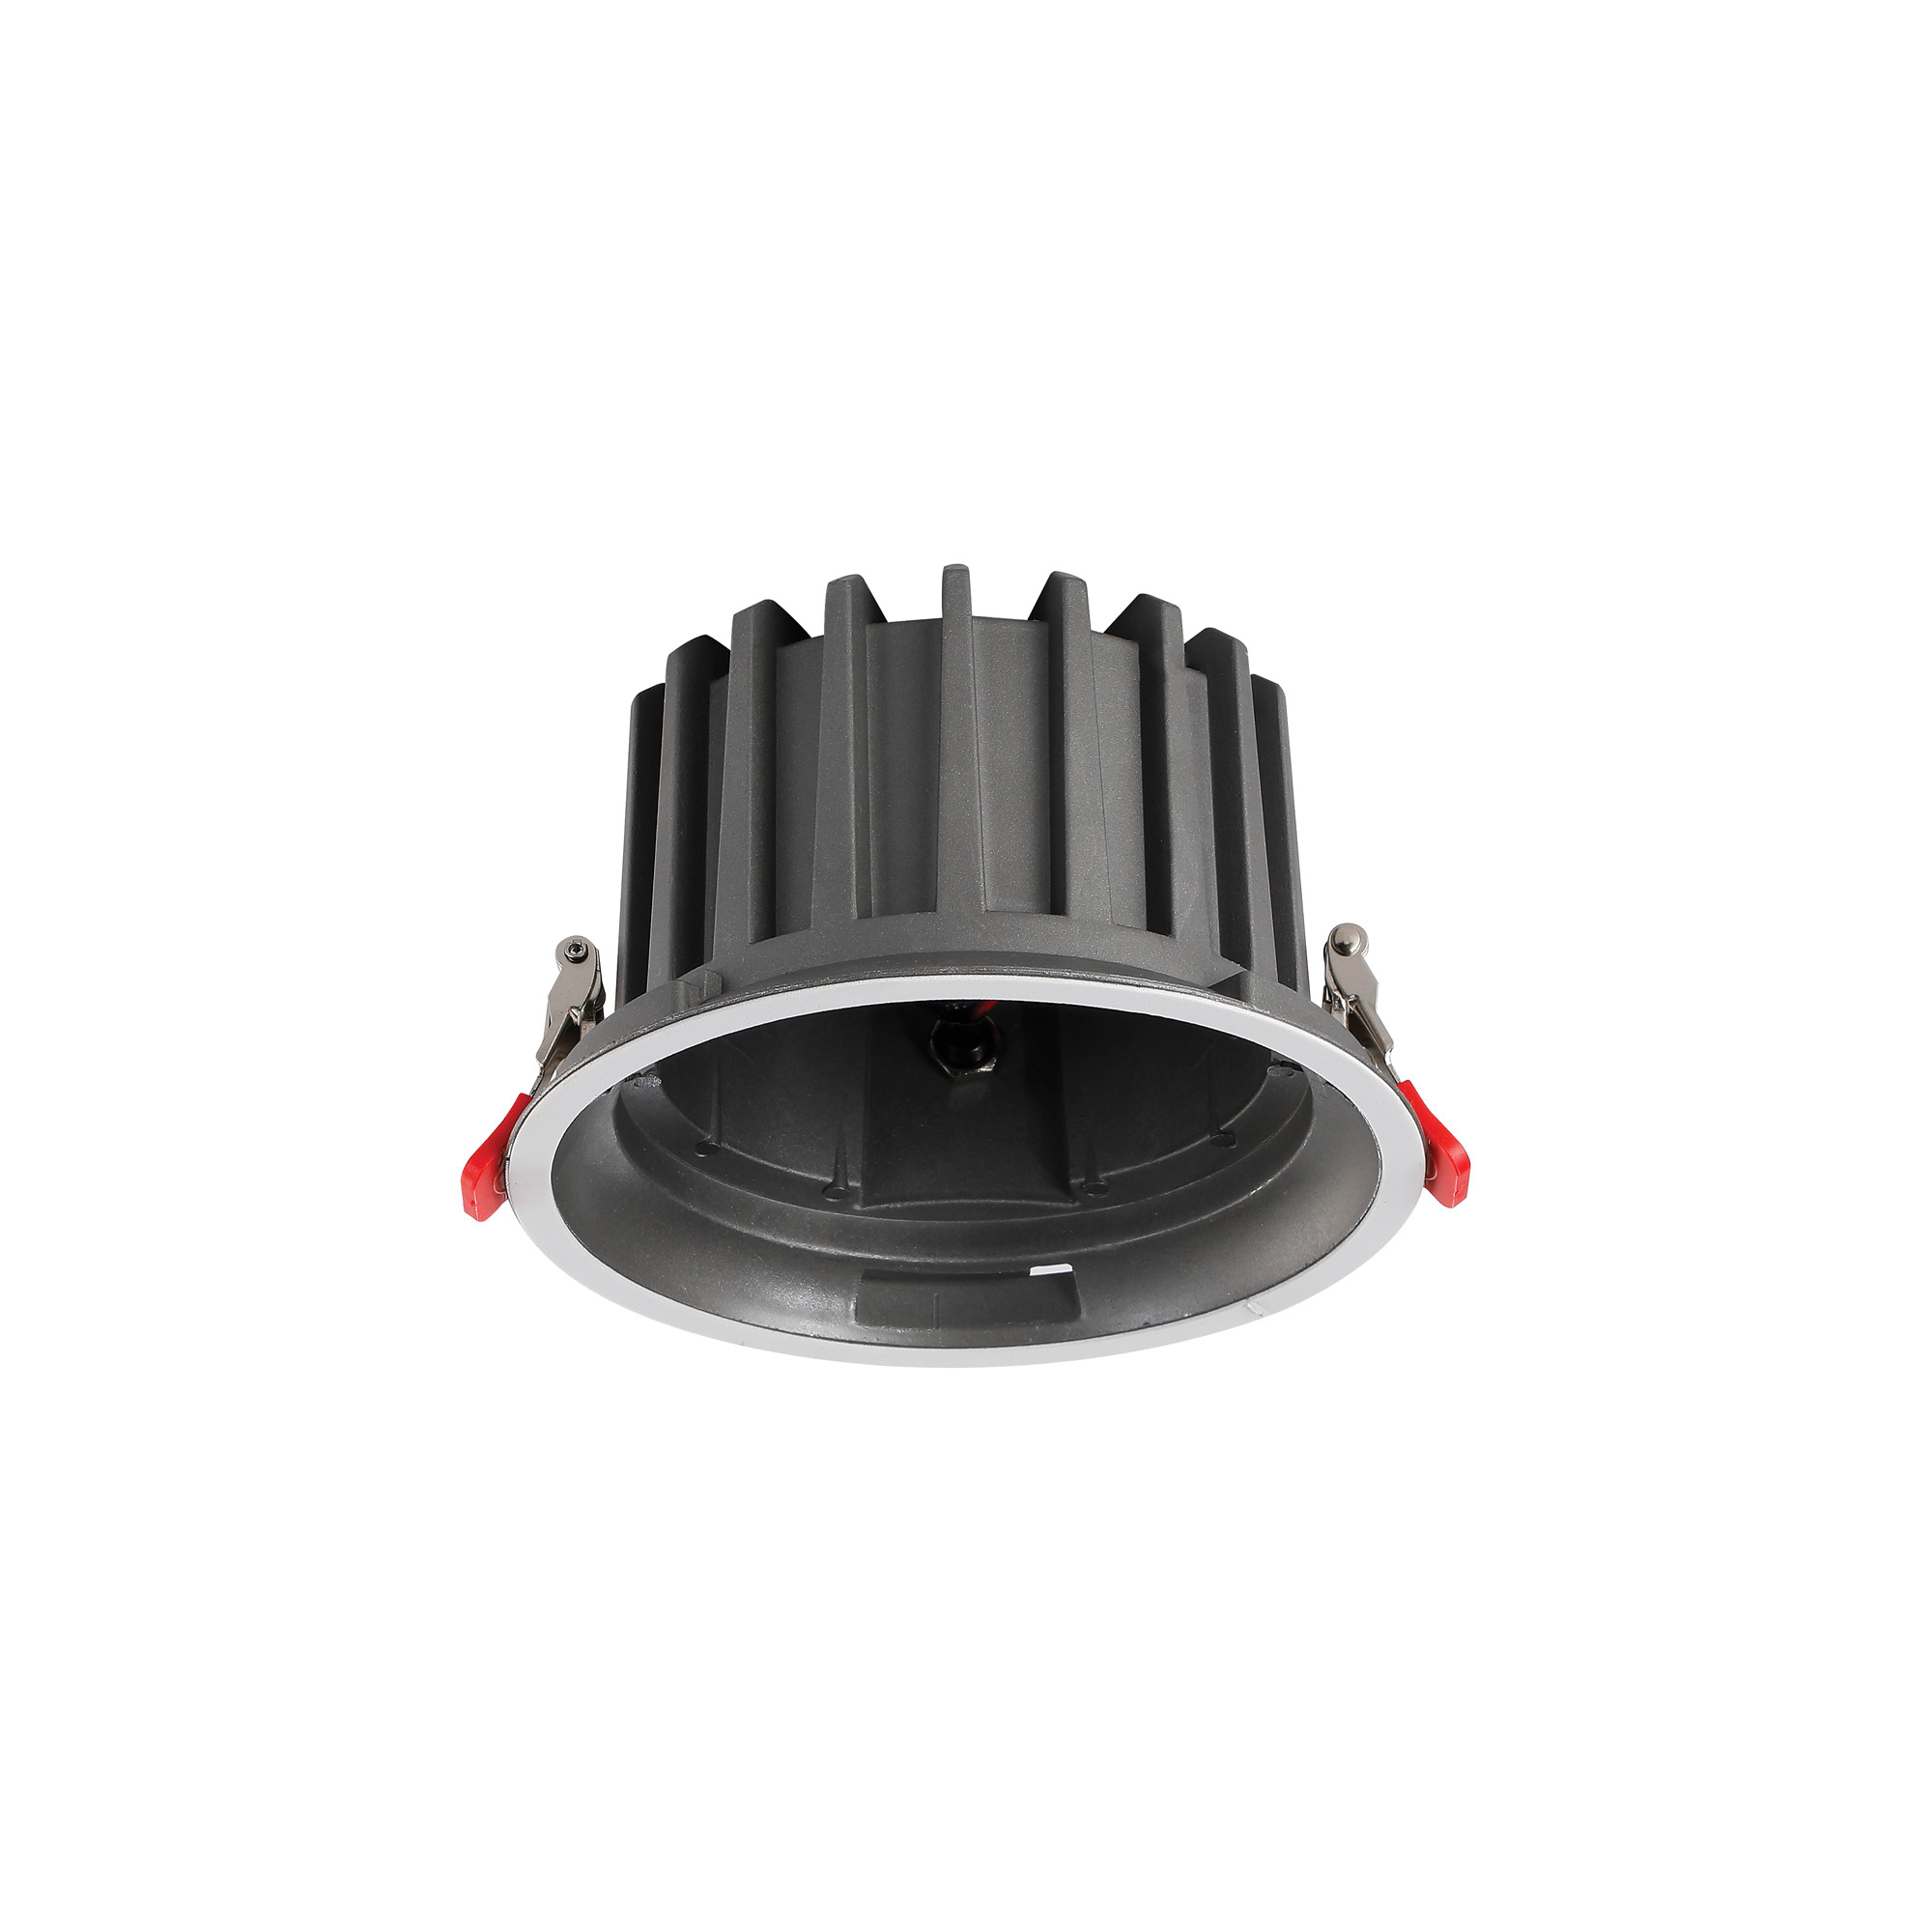 DX200421  Bionic 24W/30W Round RecessedFixed housing Only Without Light Engin ; White; Suitable for Bionic Engine.